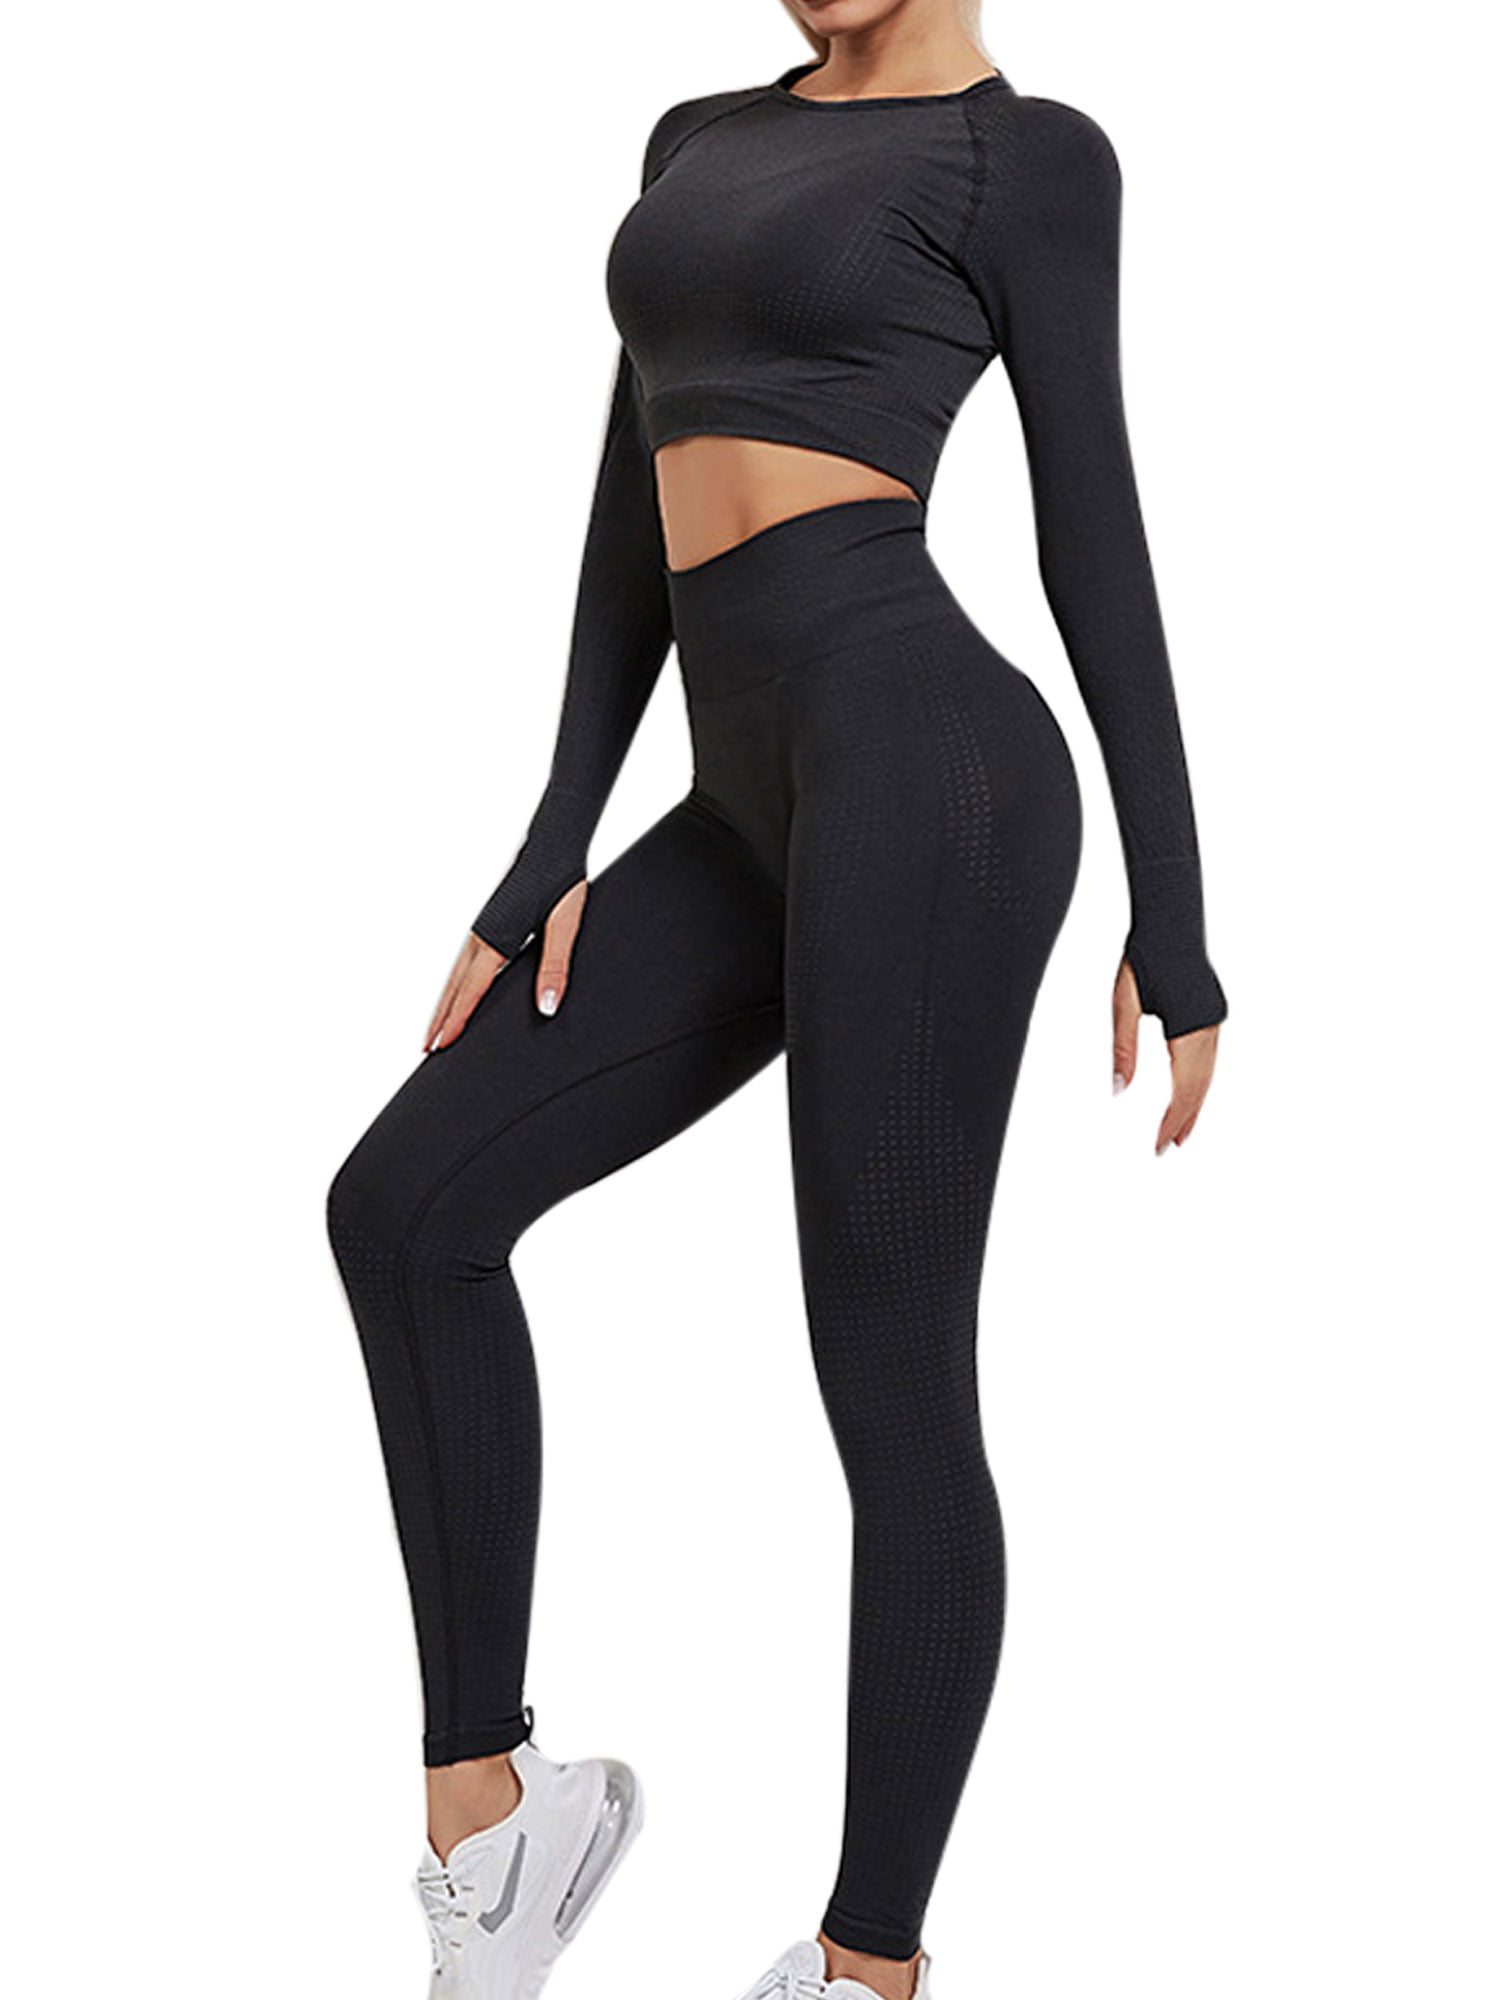 Womens 2 Piece Workout Set Yoga Outfits Seamless Stretch Crop Top with High Waist Leggings Activewear Sets